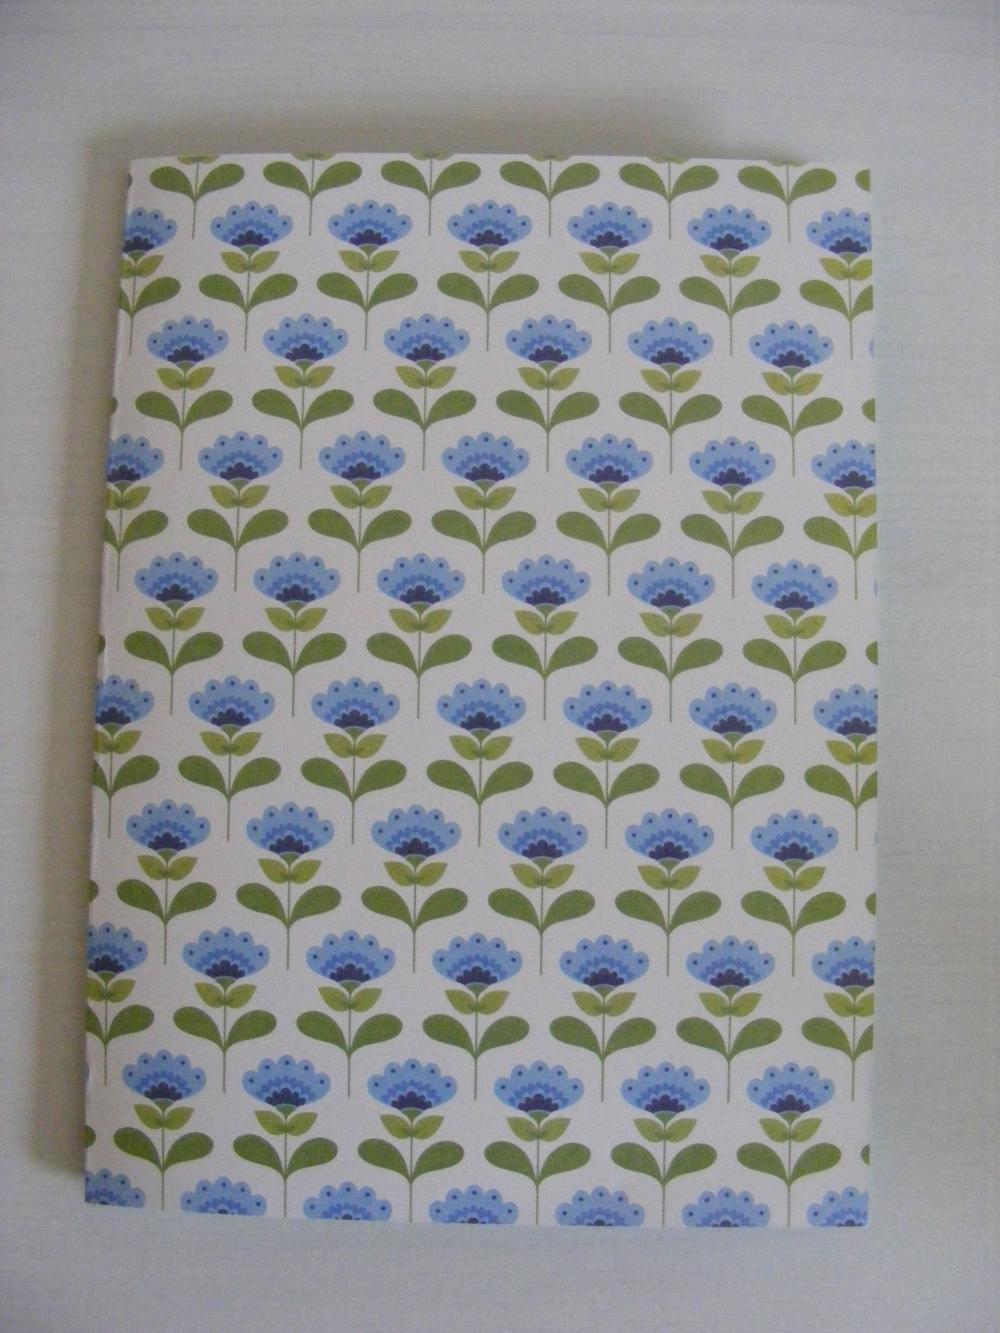 A5 Handmade Notebook Blue And Green Tida Flowers Cover With Plain Blue And Yellow Pages